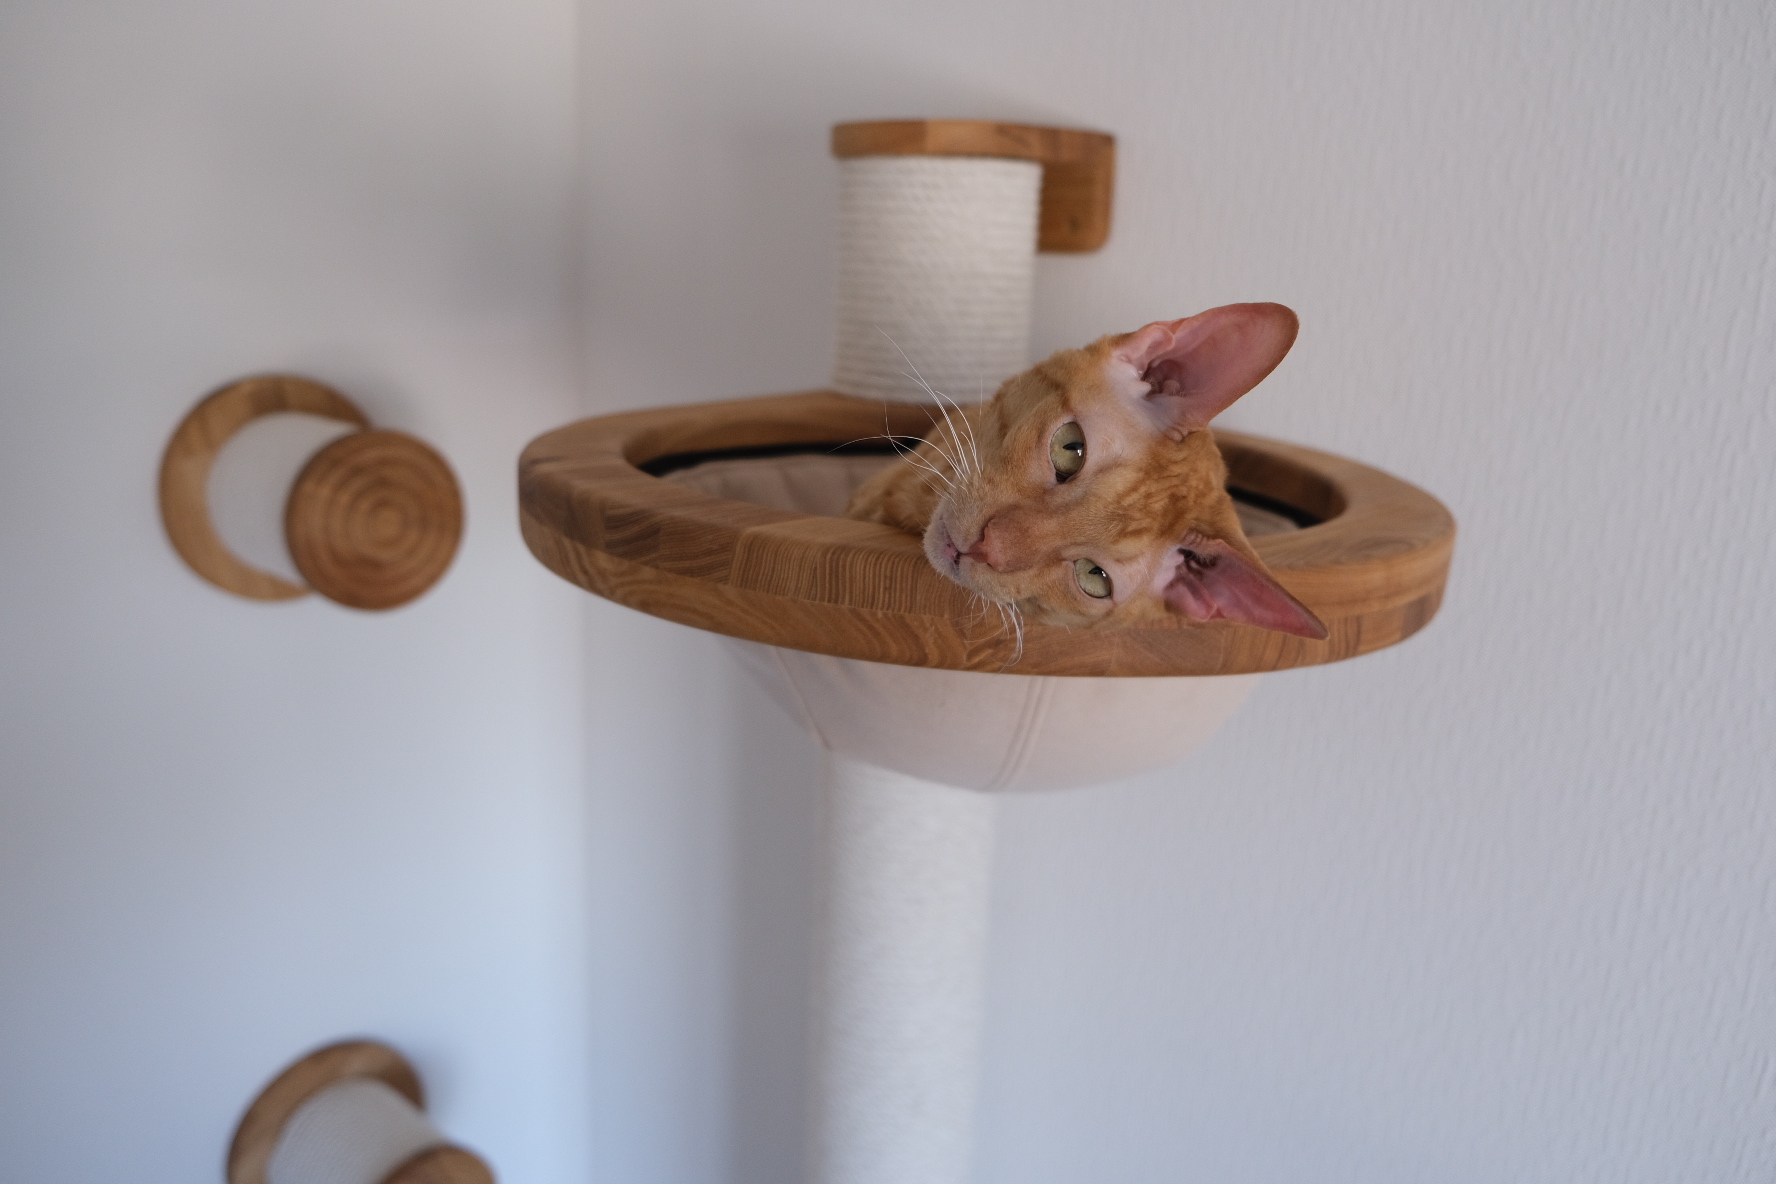 Flynn poses in a new lounger on the wall scratching post